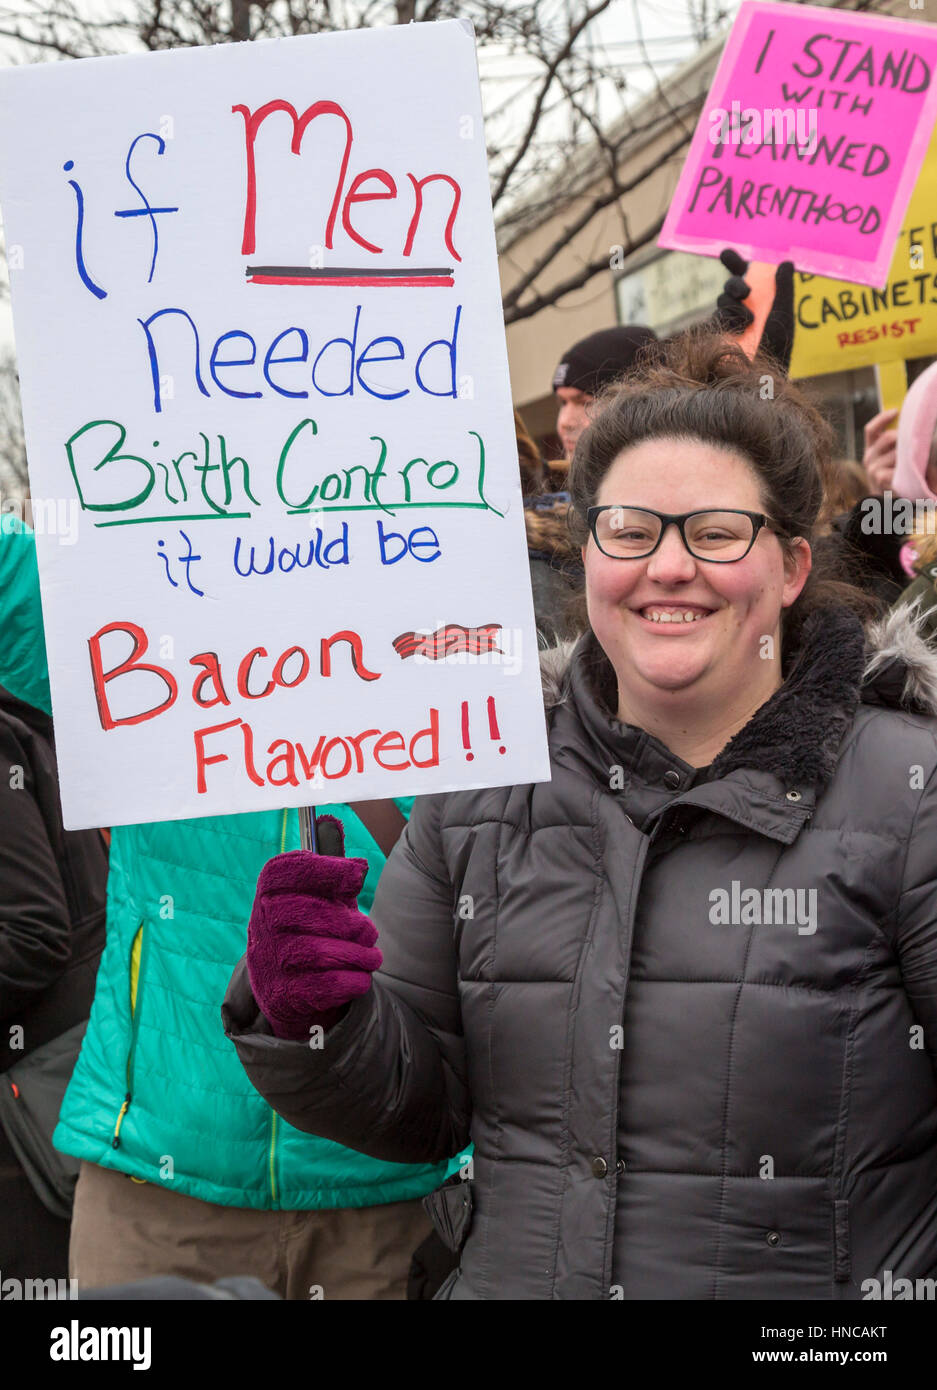 Ferndale, Michigan, USA. 11th February 2017. Supporters of Planned Parenthood far outnumbered opponents as both sides rallied outside Planned Parenthood clinics in metro Detroit. The Trump administration says it will deny federal funds to Planned Parenthood for women's health services because the agency helps some women obtain legal abortions. Credit: Jim West/Alamy Live News Stock Photo